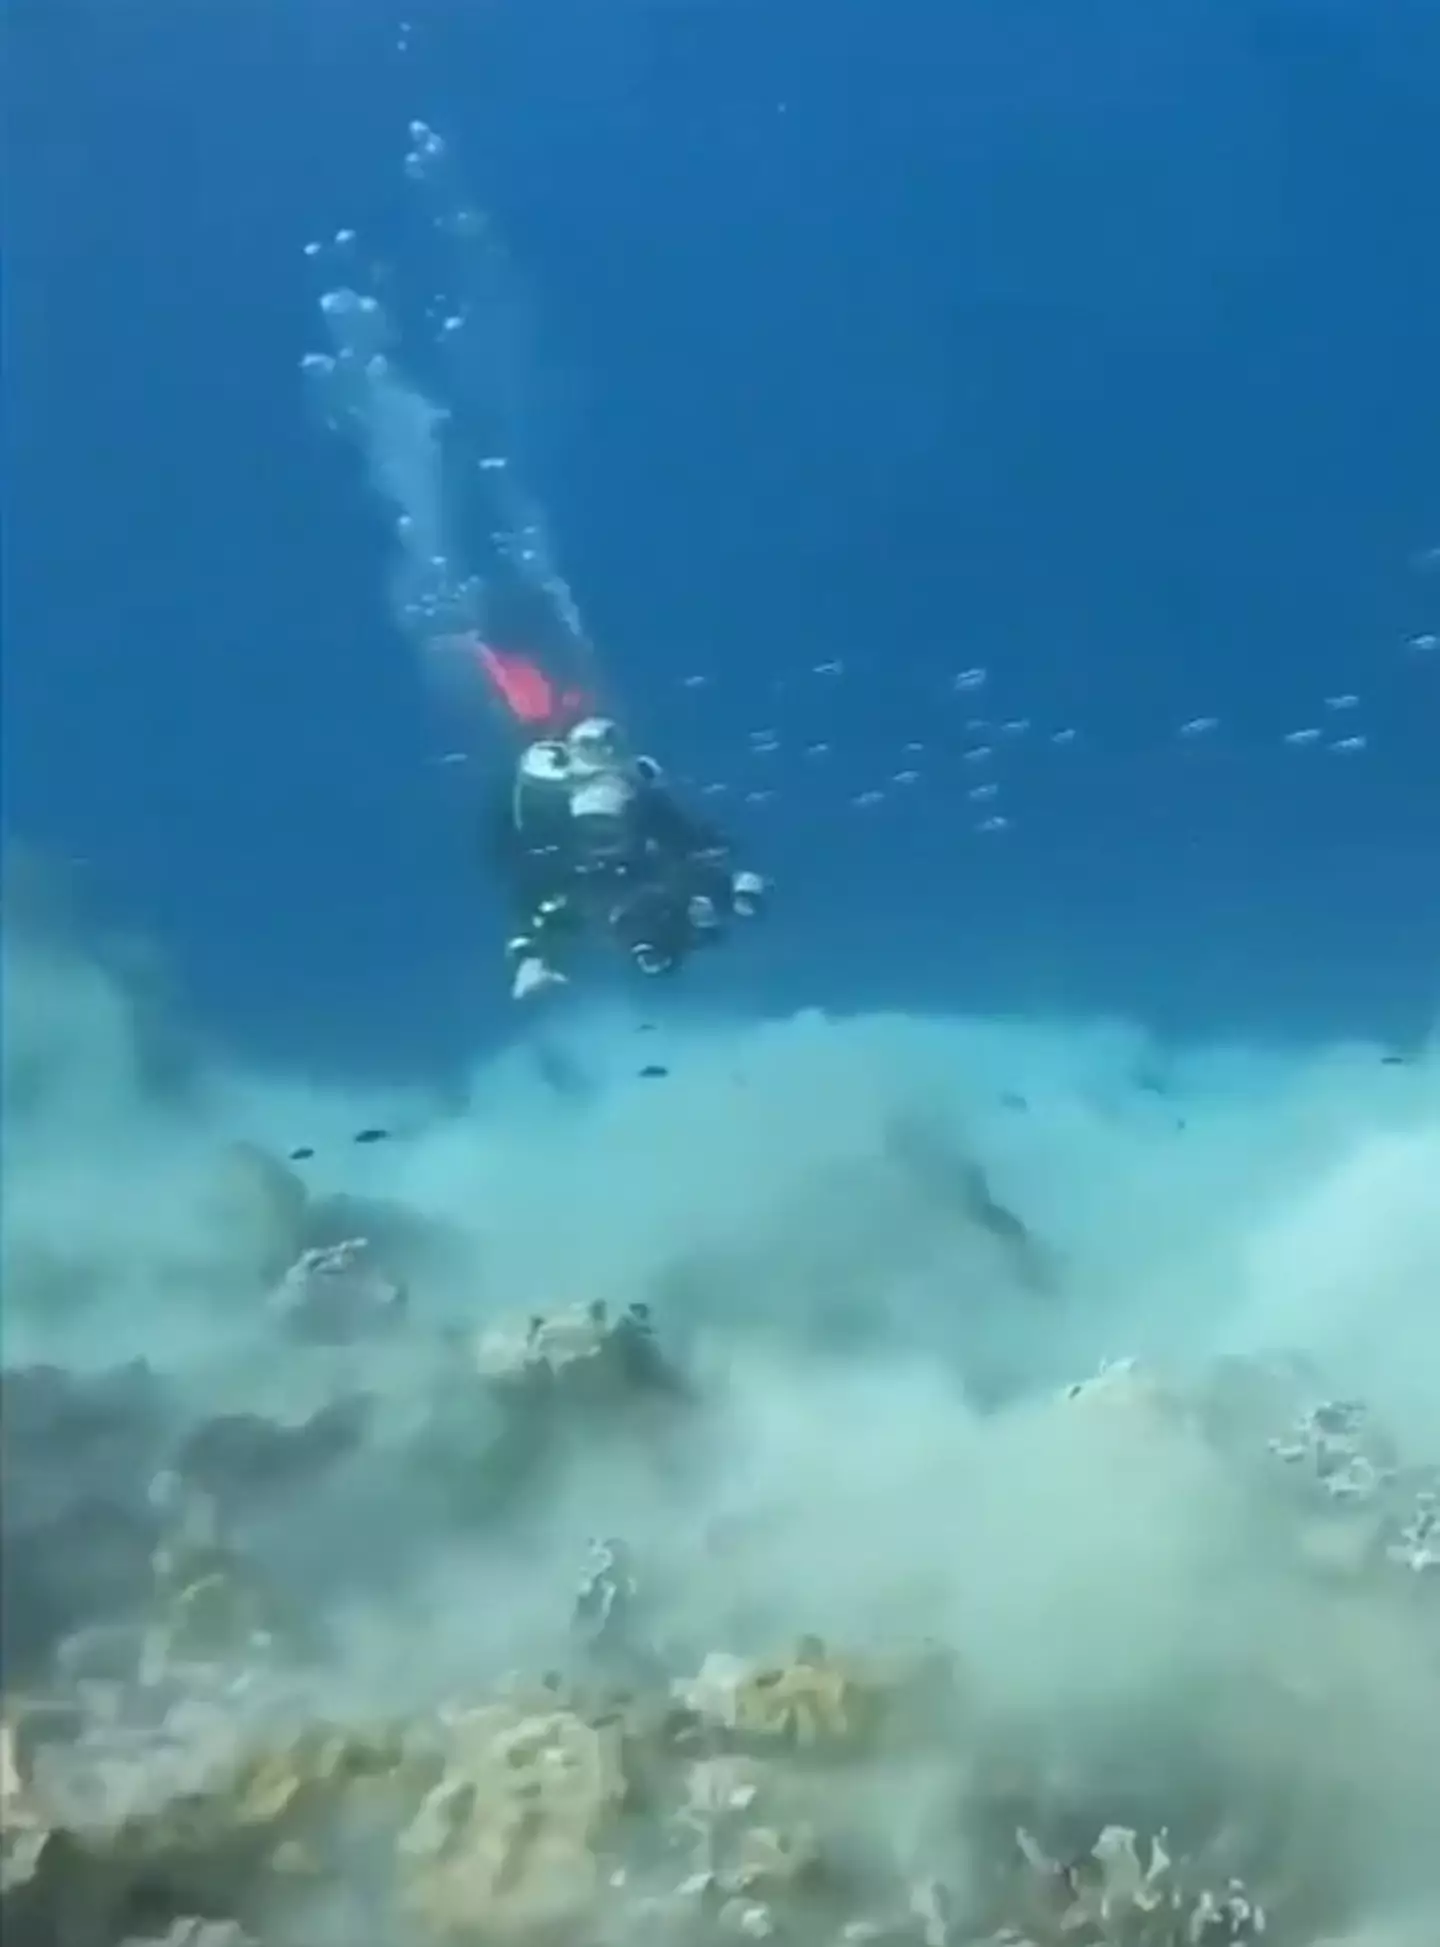 Would the divers even realize what's happening?